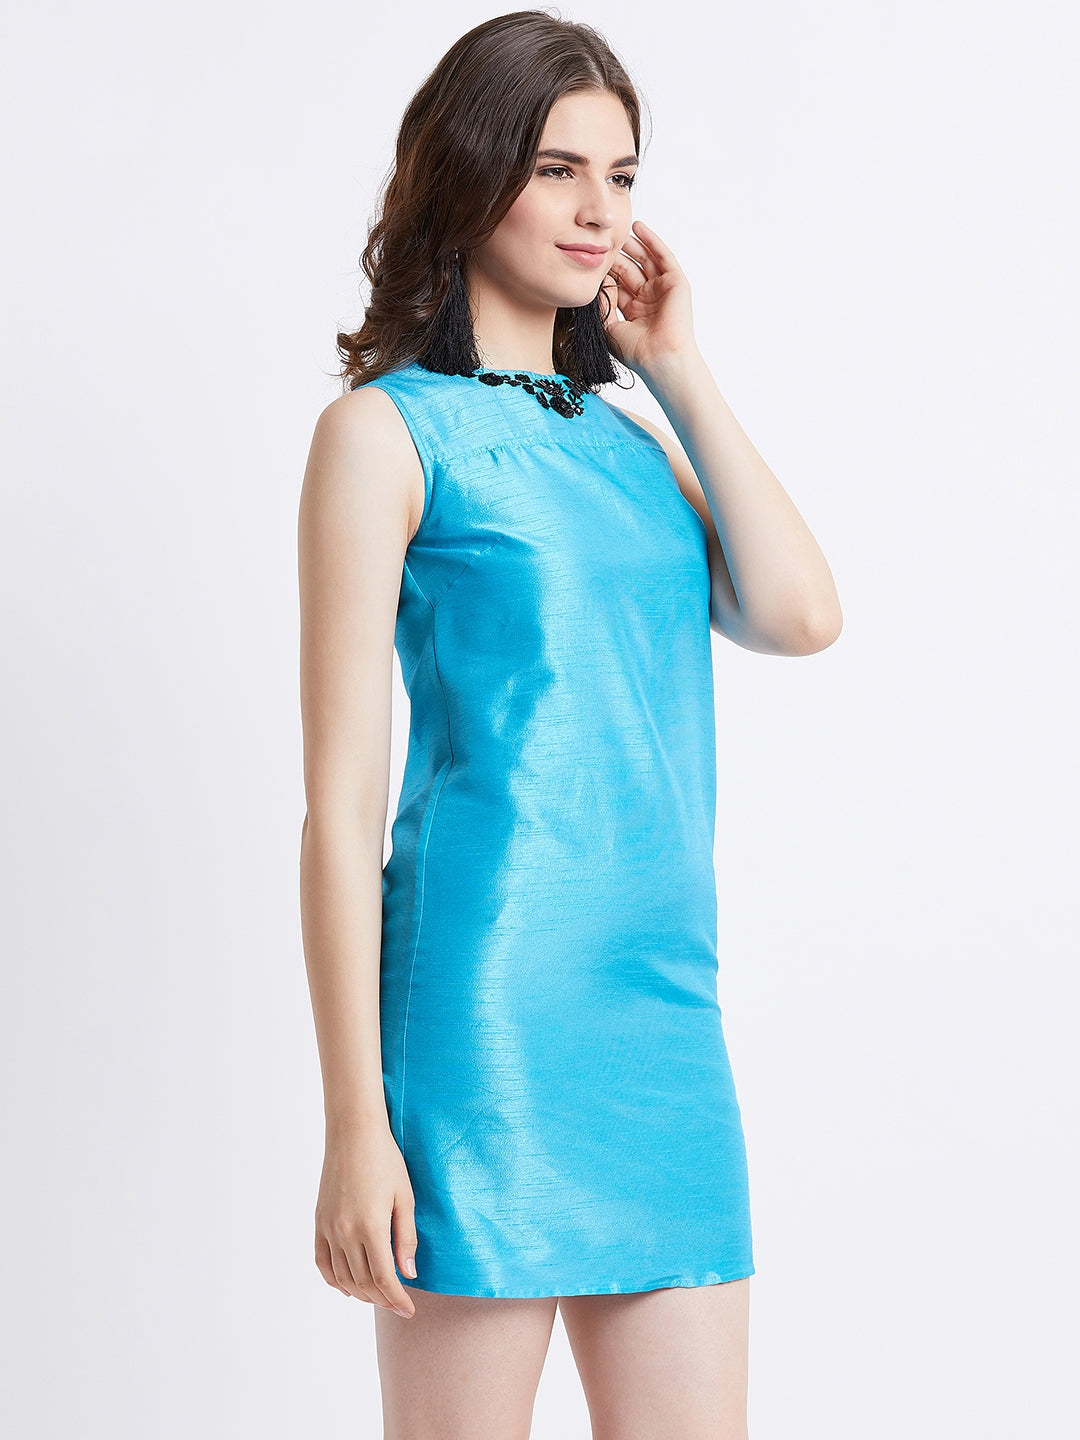 LY2 Hand Embelleshed Solid A-Line Dress